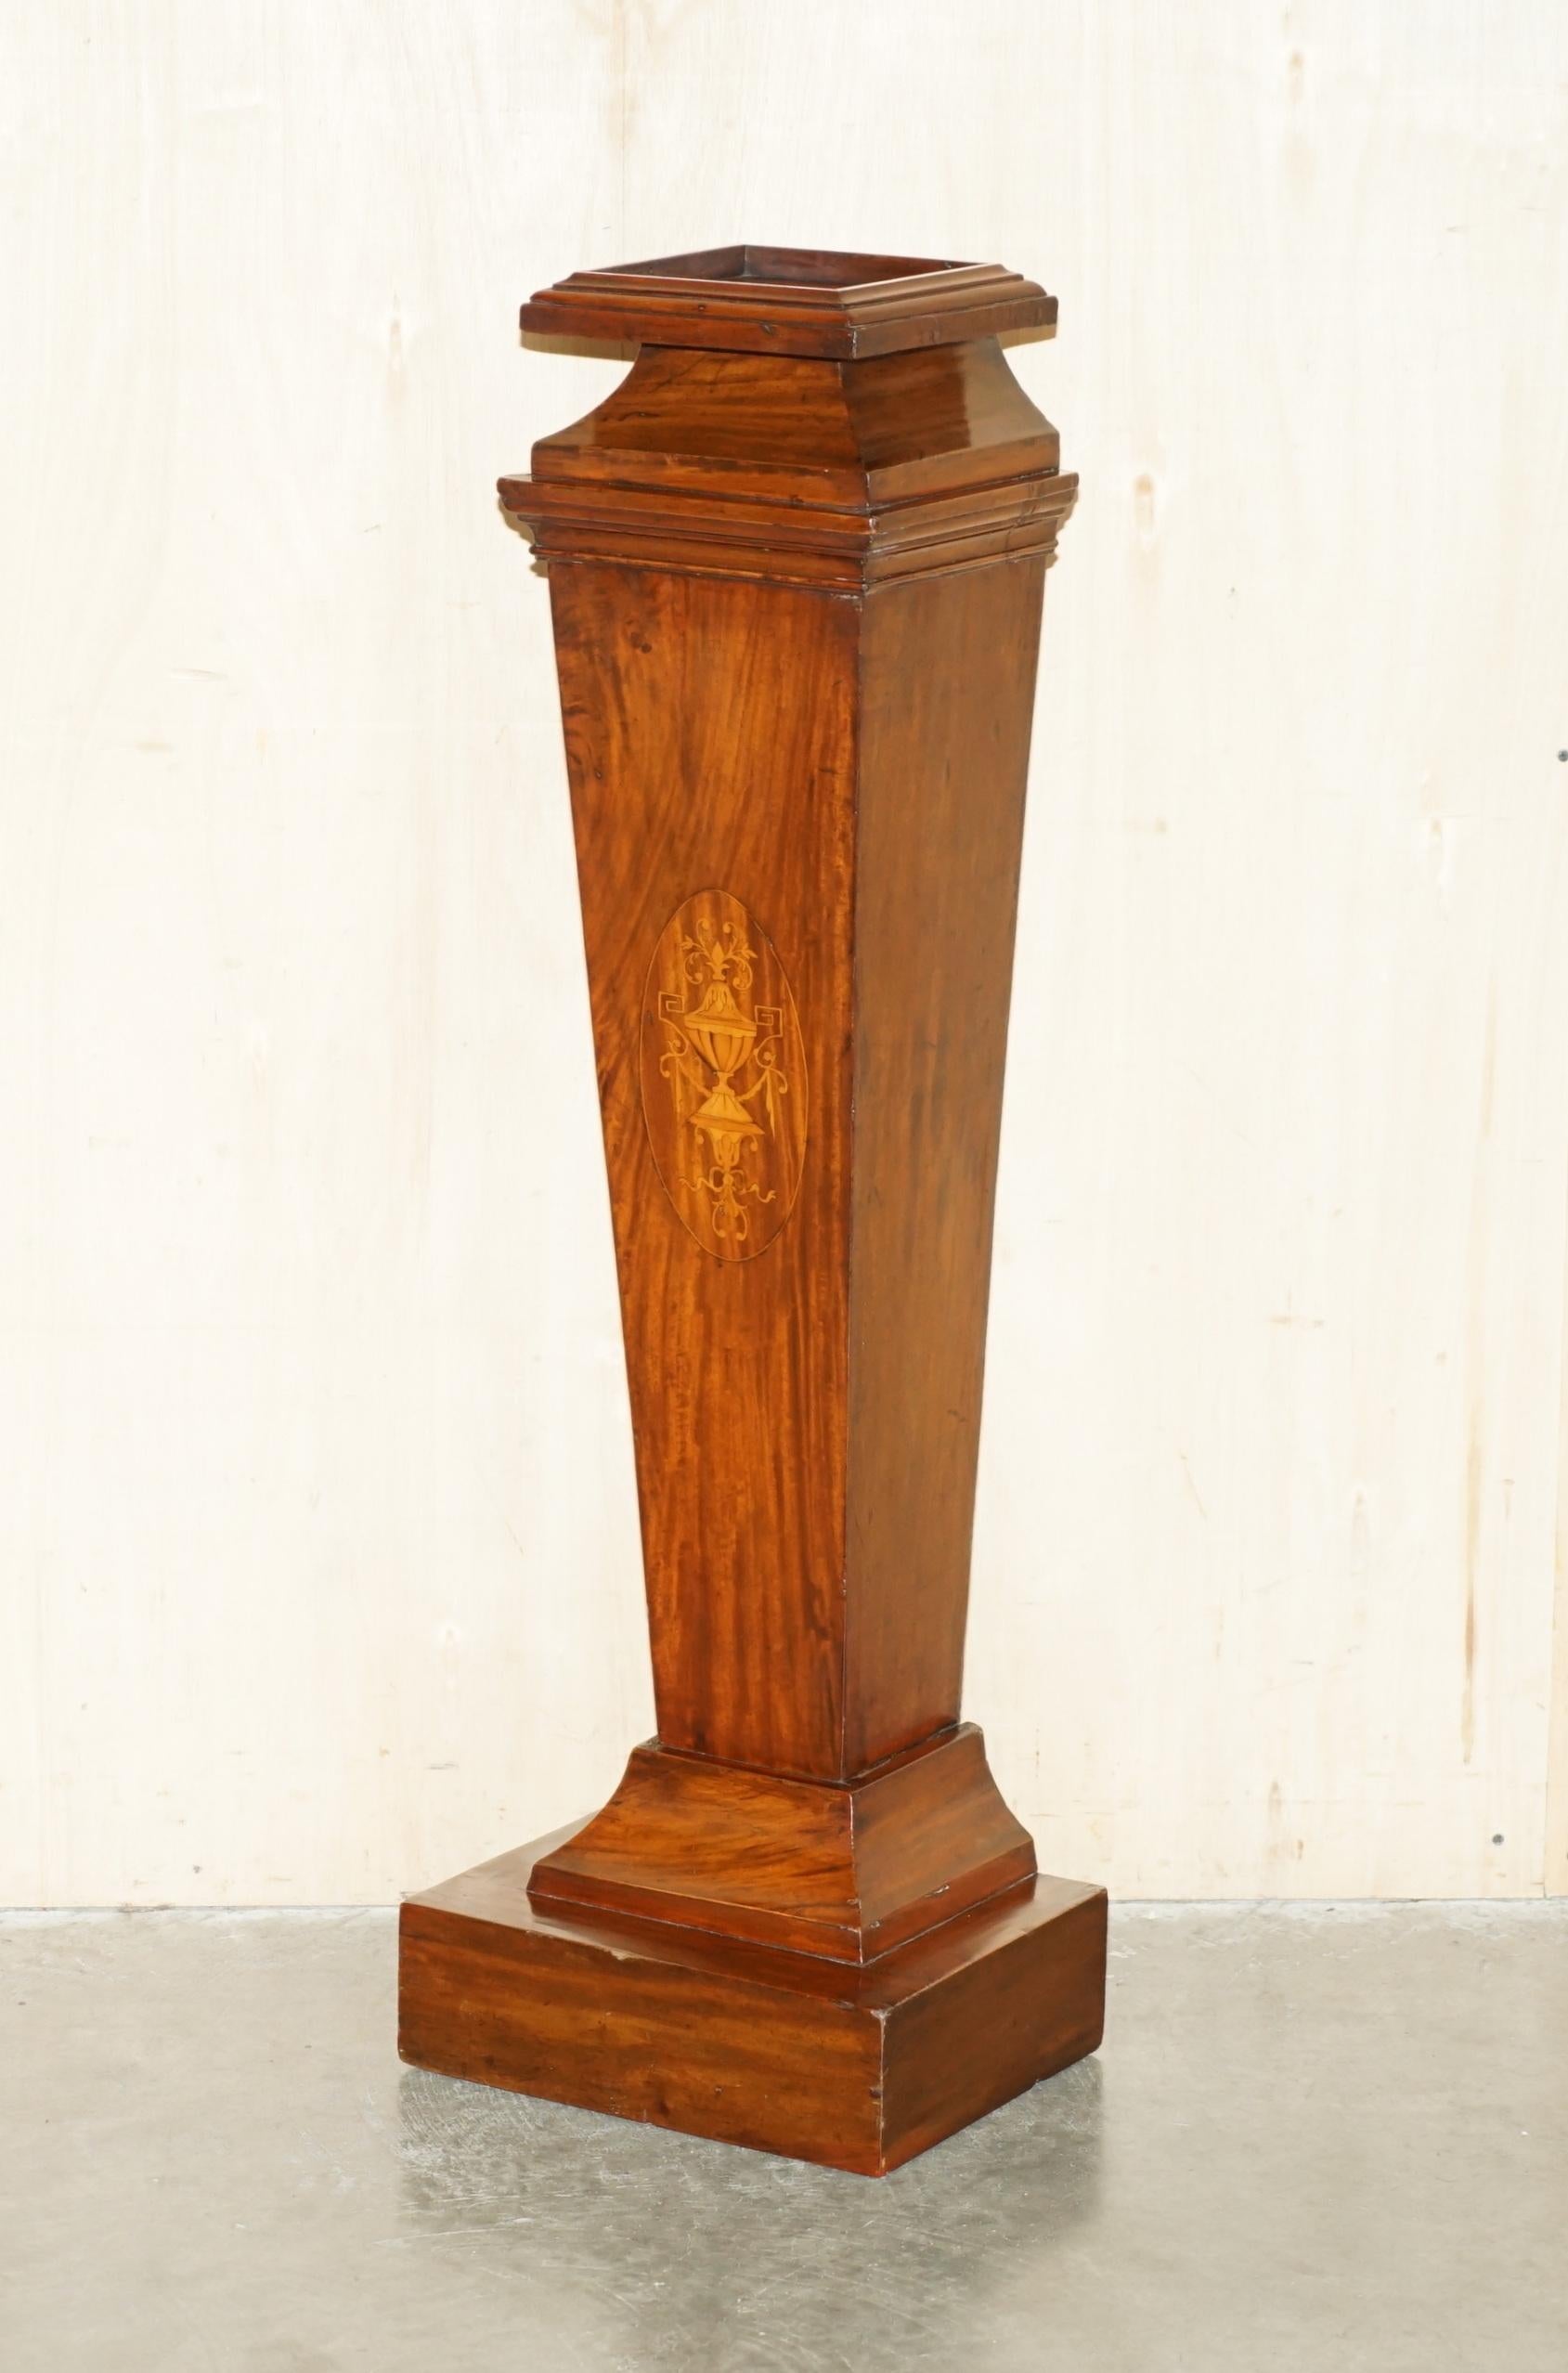 Royal House Antiques

Royal House Antiques is delighted to offer for sale this lovely hand made in England, flamed Mahogany with Walnut Sheraton Revival inlay pedestal stand for displaying plants, busts, taxidermy and trinkets 

Please note the